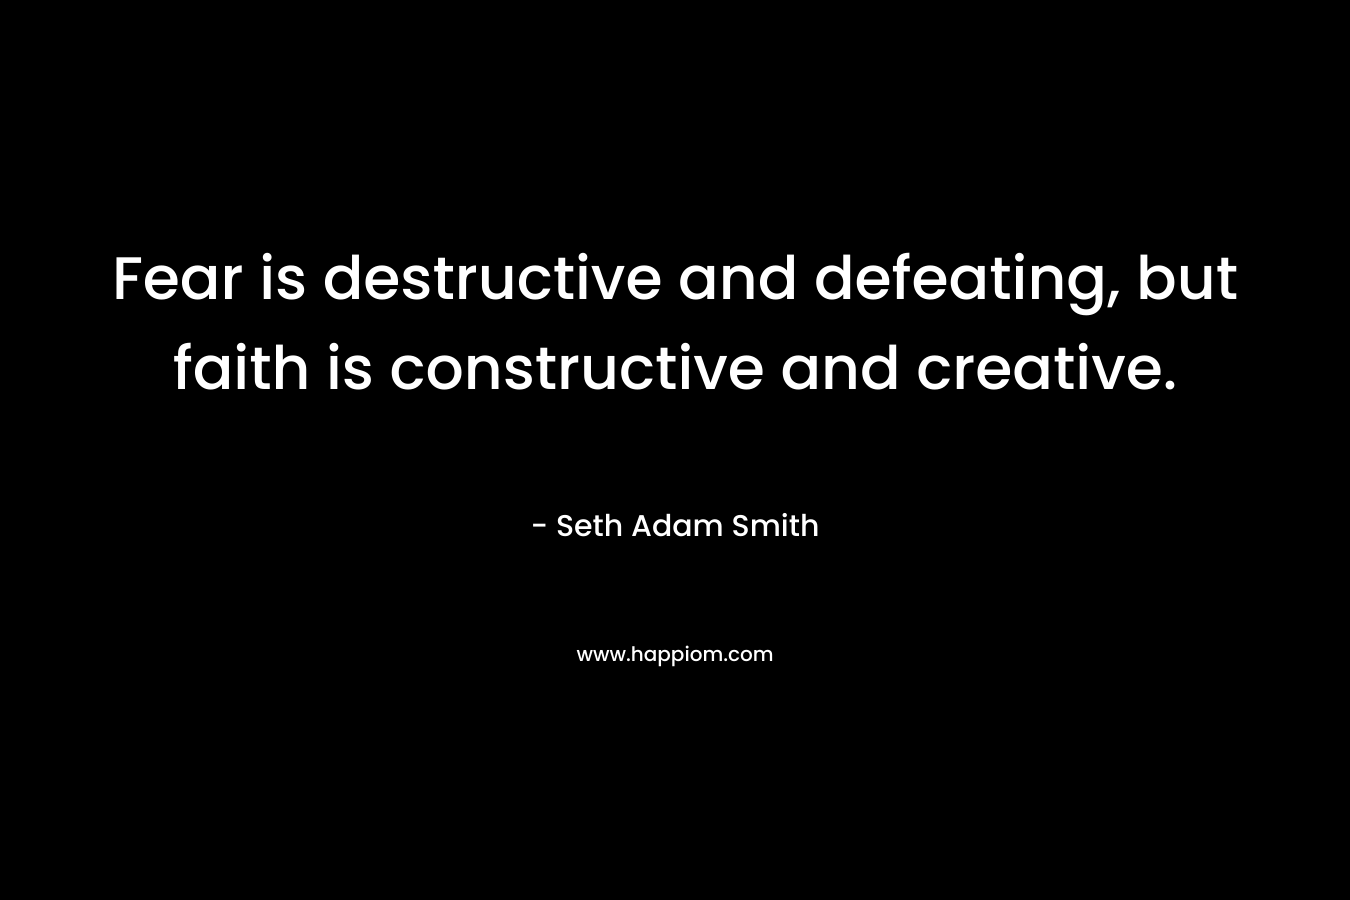 Fear is destructive and defeating, but faith is constructive and creative.